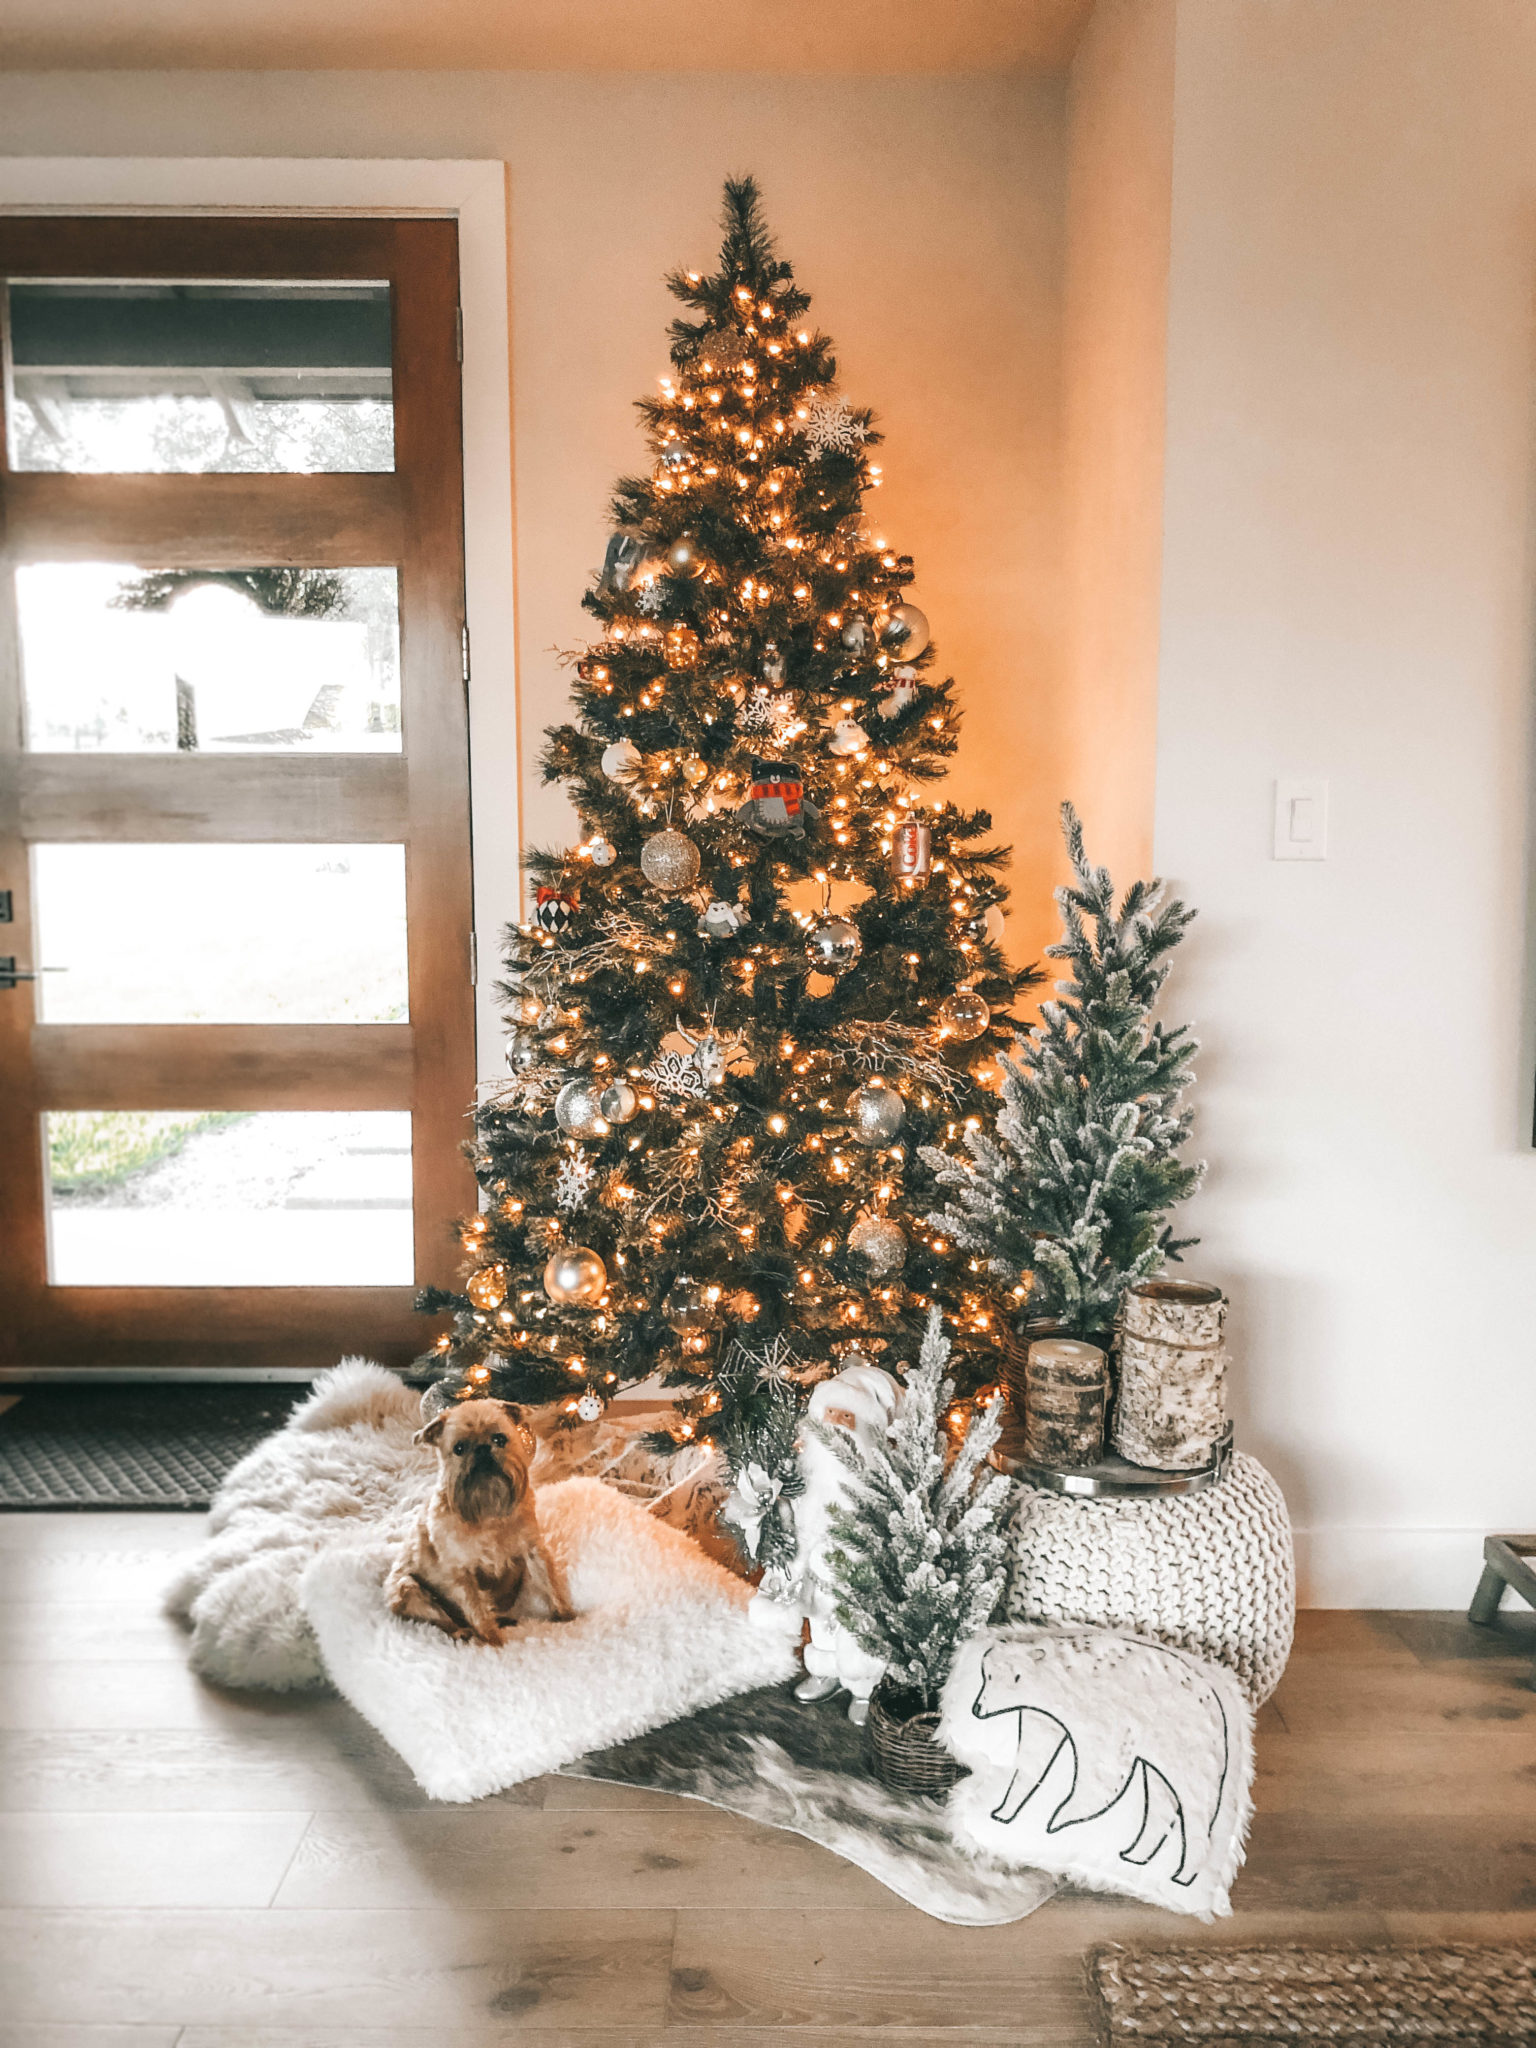 DTKAustin is sharing The Best Holiday Gift Ideas for Dogs & Their Owners. From dog beds to dog toys to dog treats this gift guide has everything you need to spoil your dog. || Dressed to Kill #petlovers #doglovers #petgiftguide #dtkaustin